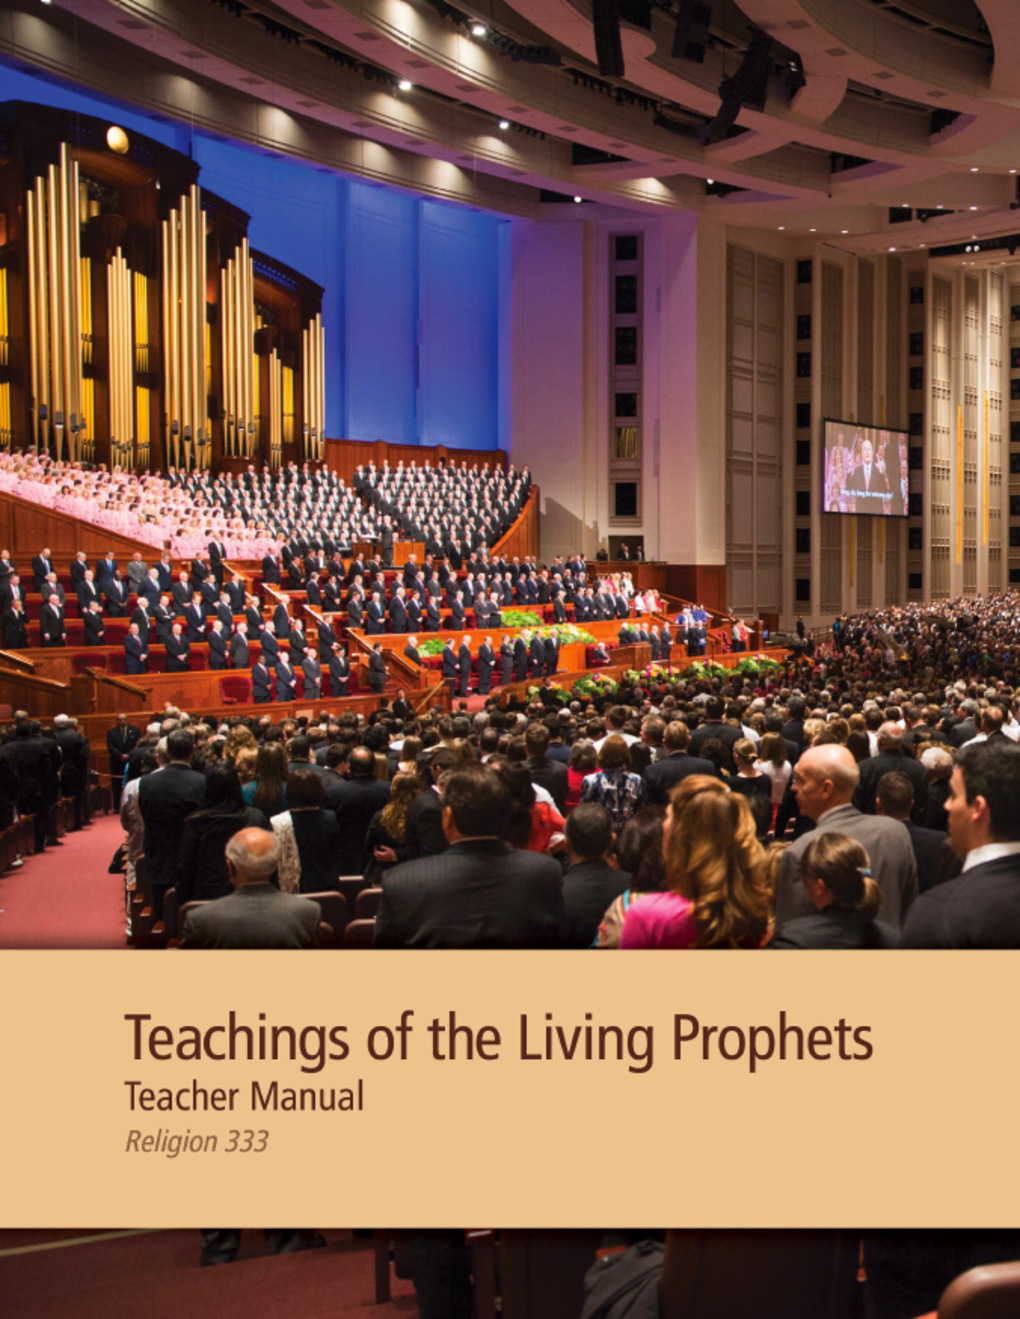 Teachings of the Living Prophets Student Manual